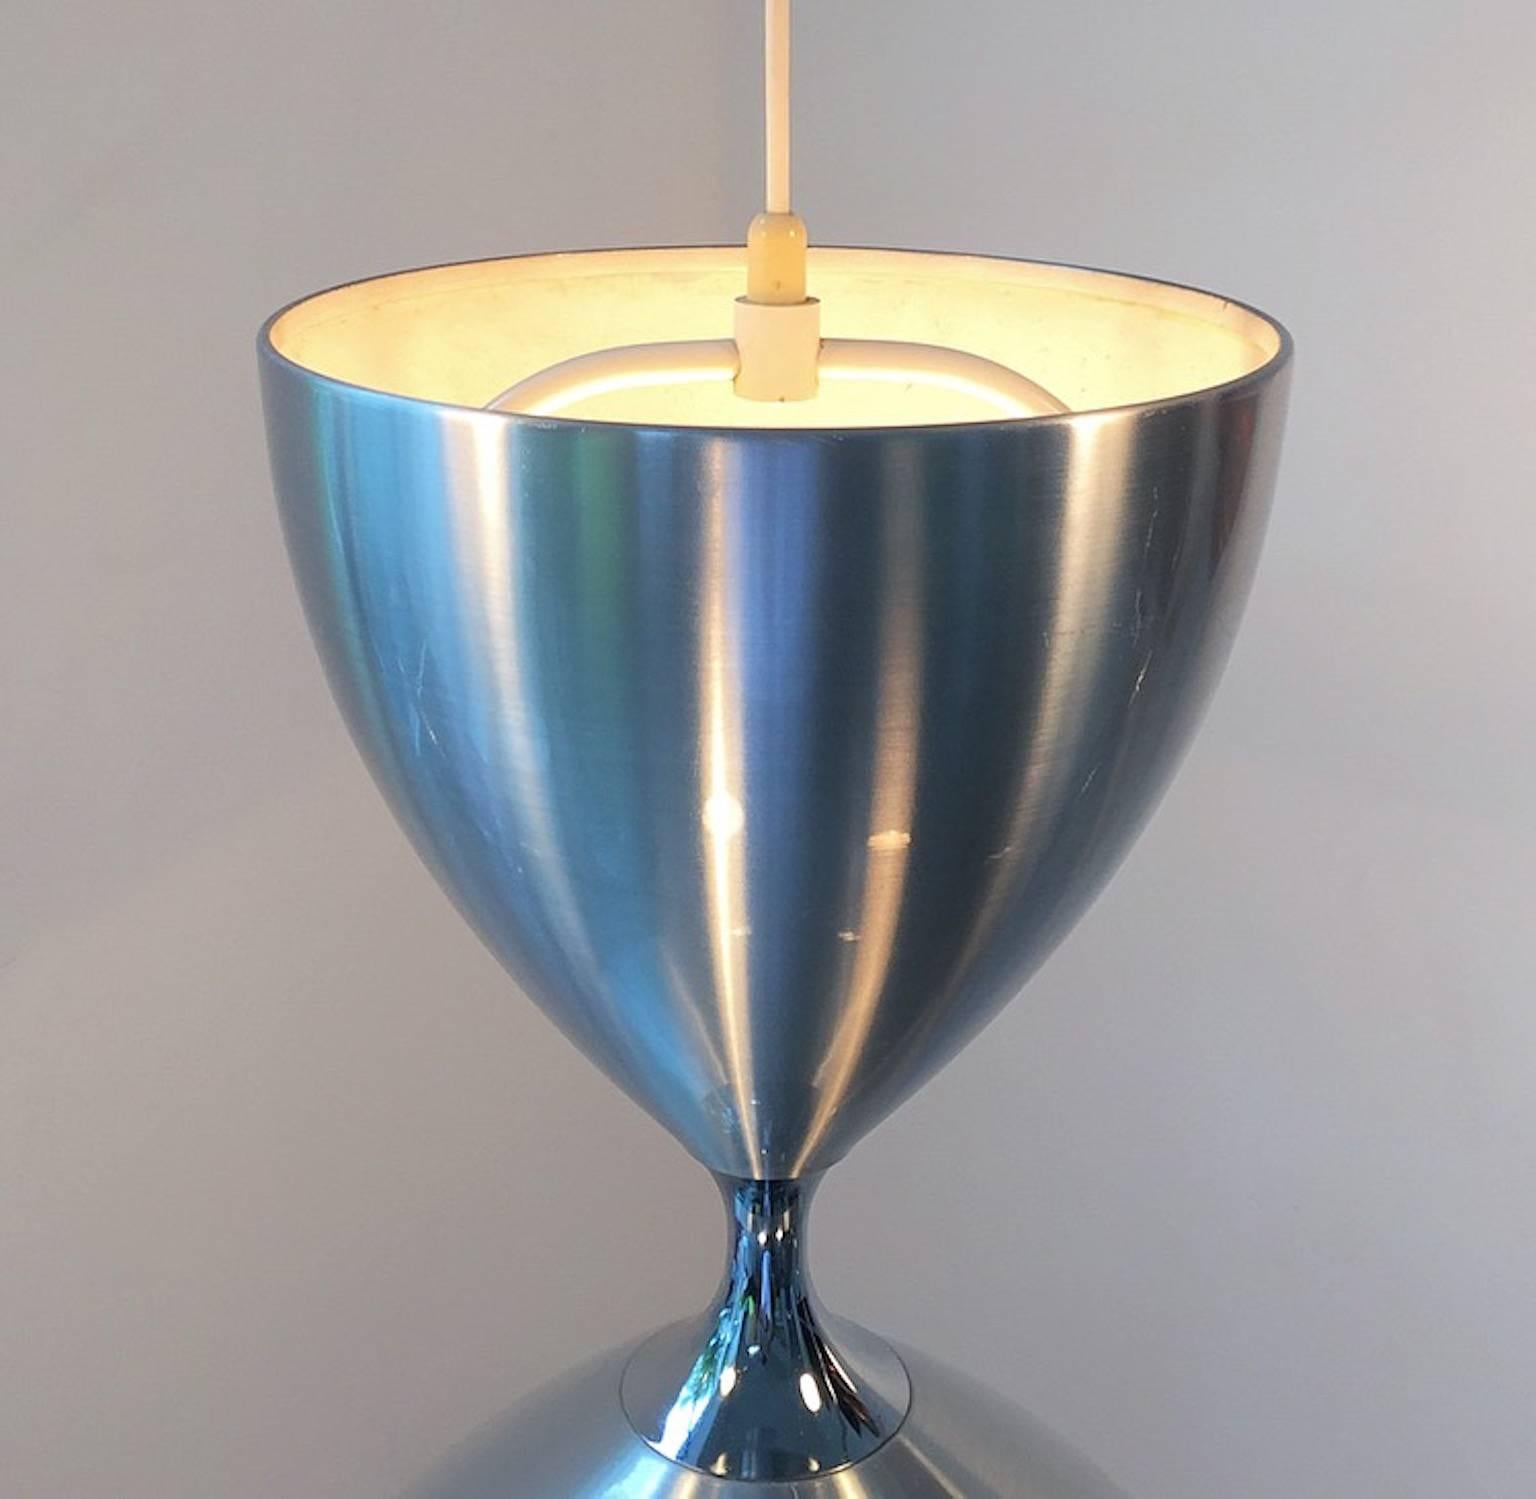 This pendant is one of the crown jewels of Danish design from the 1960s. Made by the world known head of design Jo Hammerborg for Fog & Mørup in 1968.

It's amazing size, shaped as a Diablo 1950s Stilnovo light with both up and downward lights,